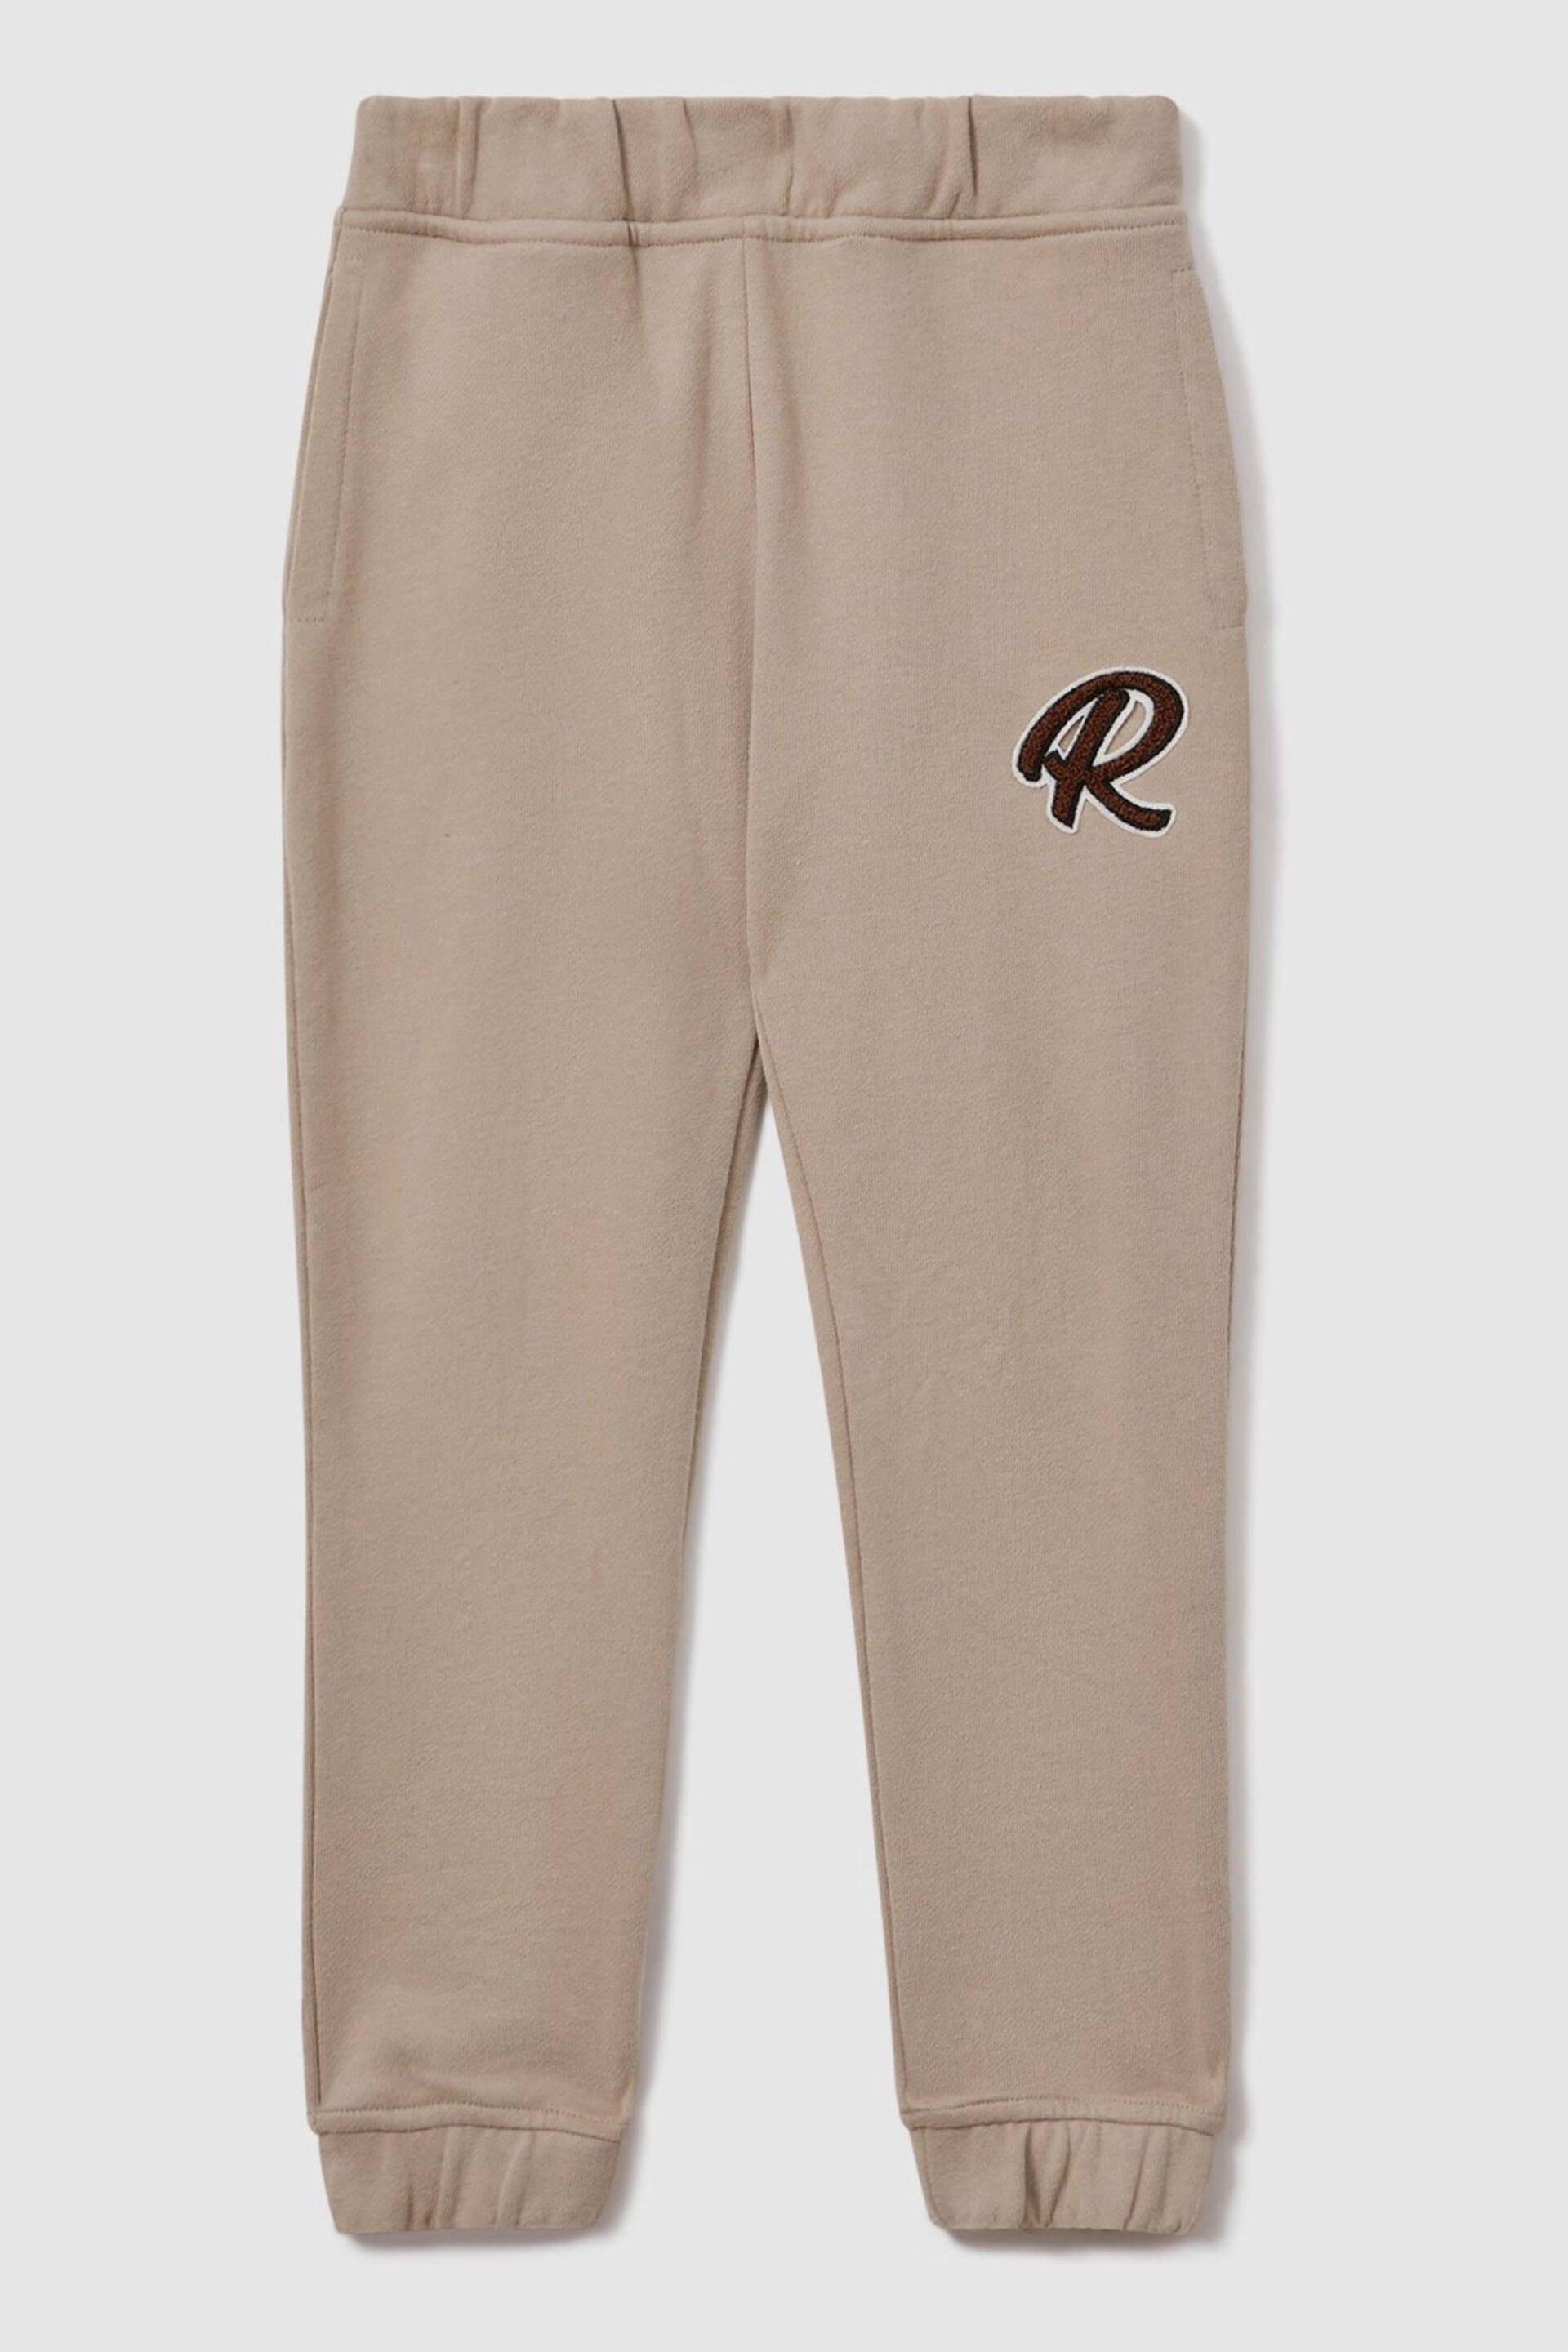 Reiss Taupe Toby Junior Cotton Elasticated Waist Motif Joggers - Image 2 of 4